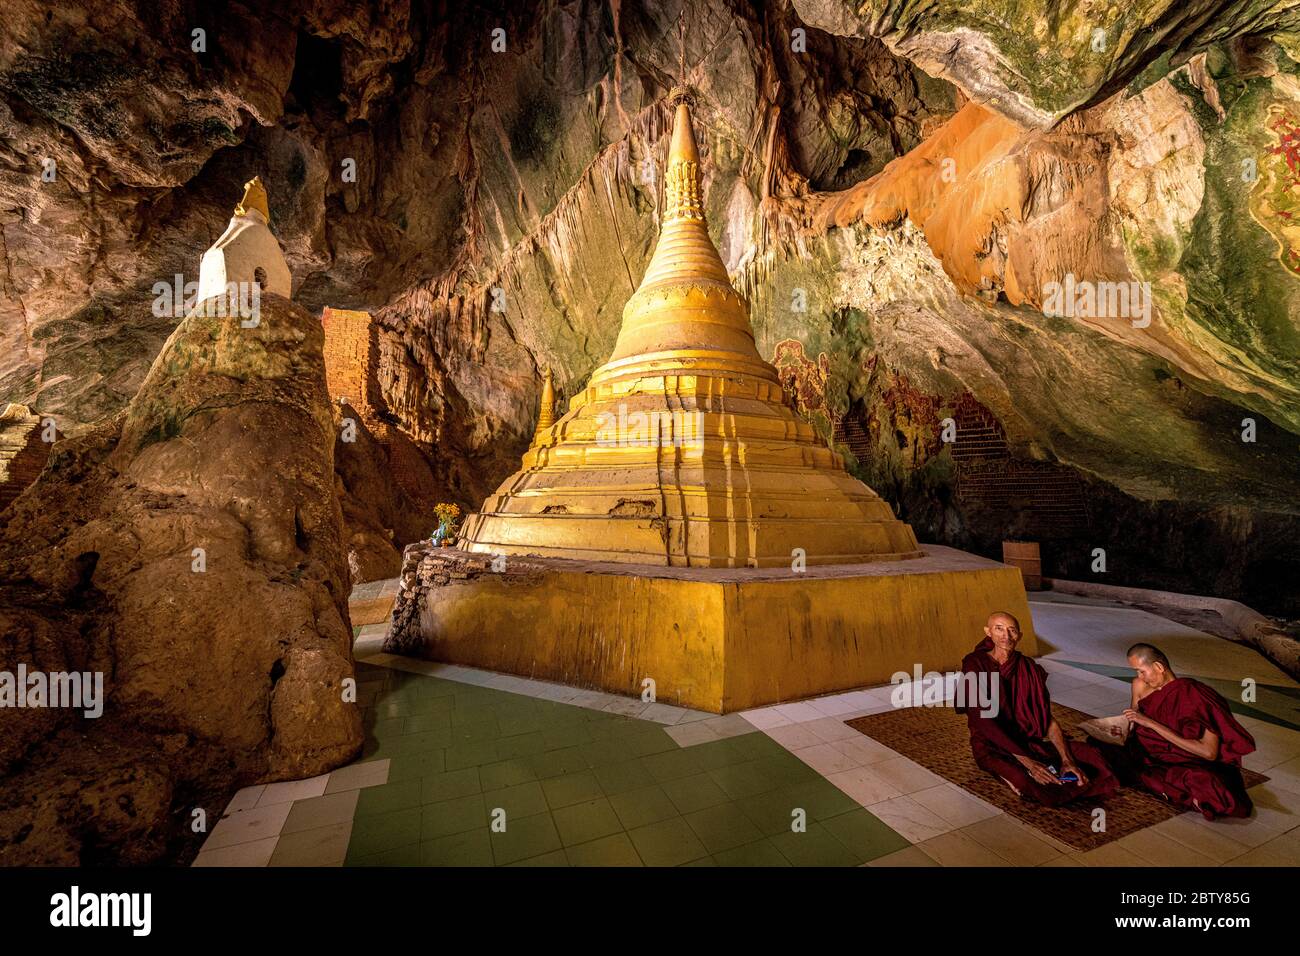 Cave filled with buddhas, Yathaypyan Cave, Hpa-An, Kayin state, Myanmar (Burma), Asia Stock Photo